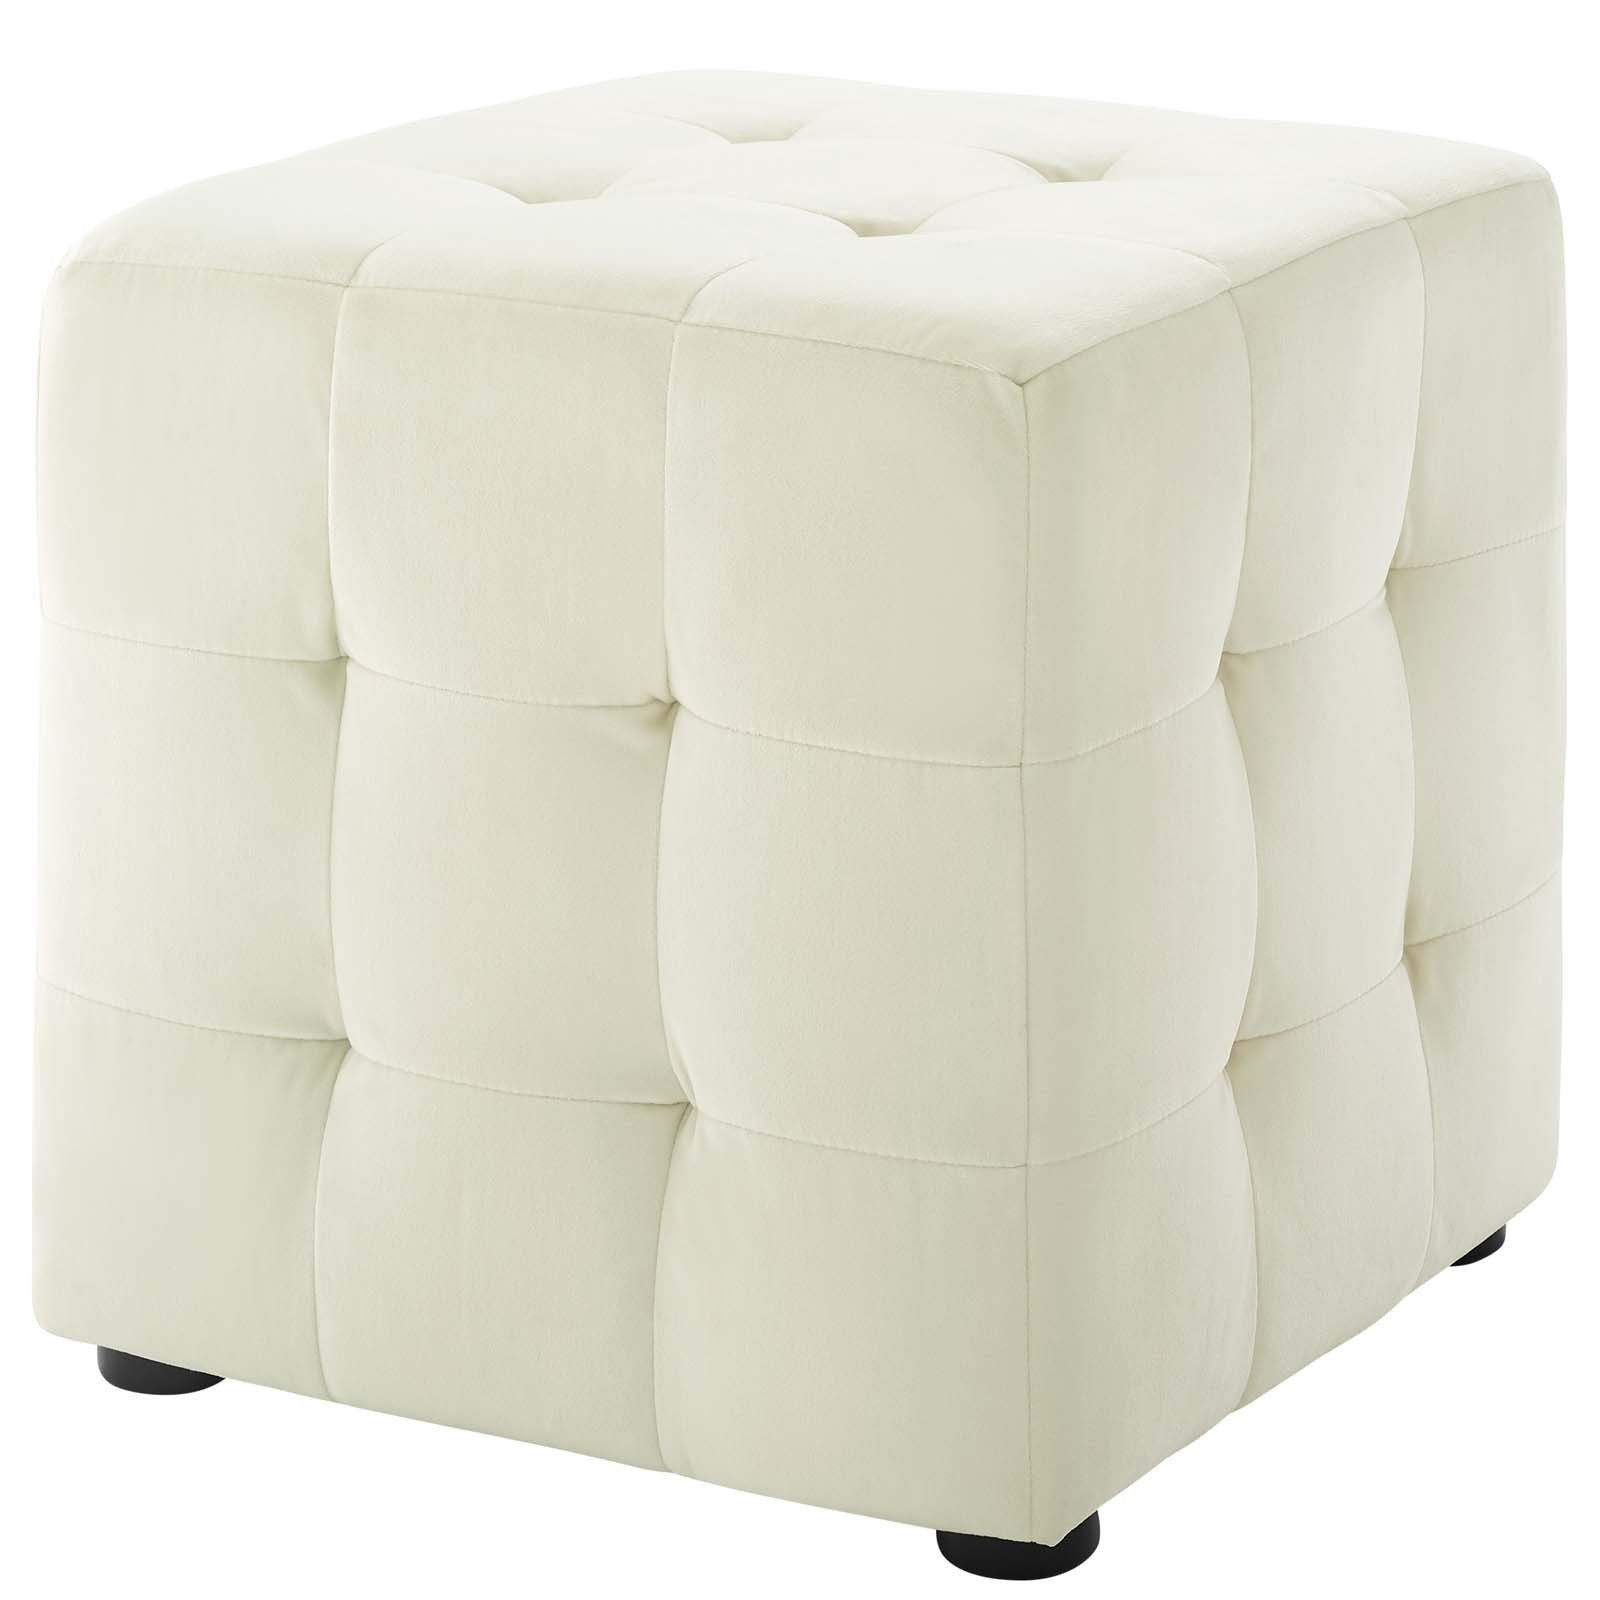 Light Blue And Gray Solid Cube Pouf Ottomans With 2017 Contour Ivory Tufted Cube Performance Velvet Ottoman Eei 3577 Ivo (View 4 of 10)